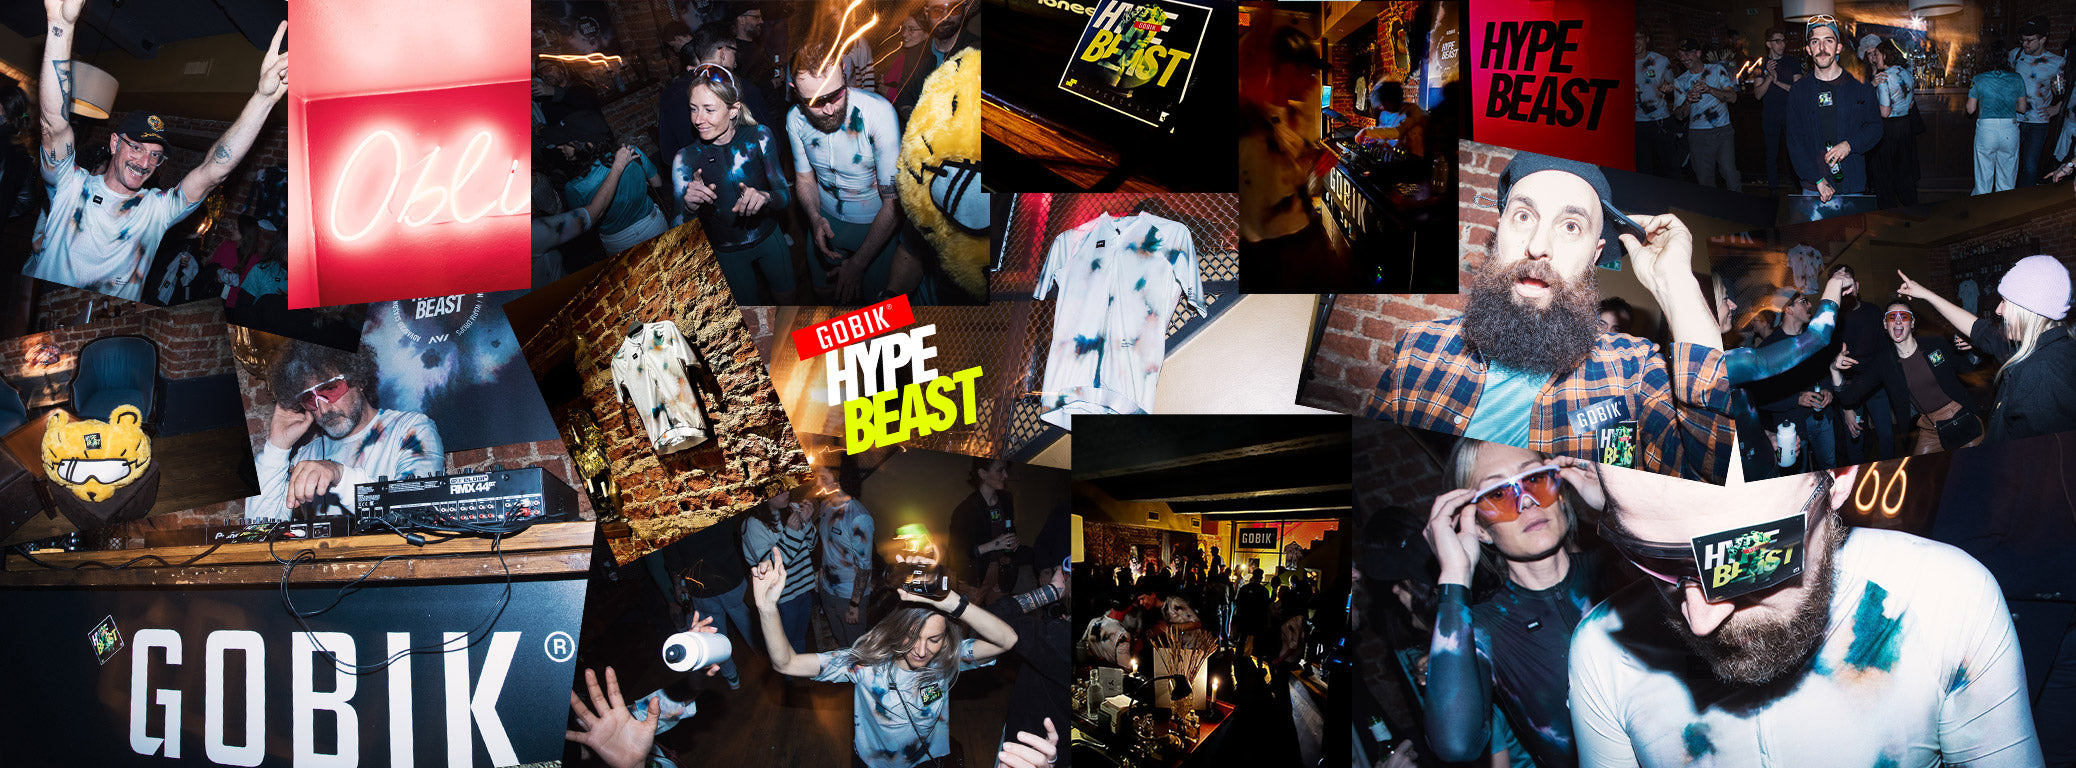 Collage of the best moments of the secret party Hypebeast in Milan